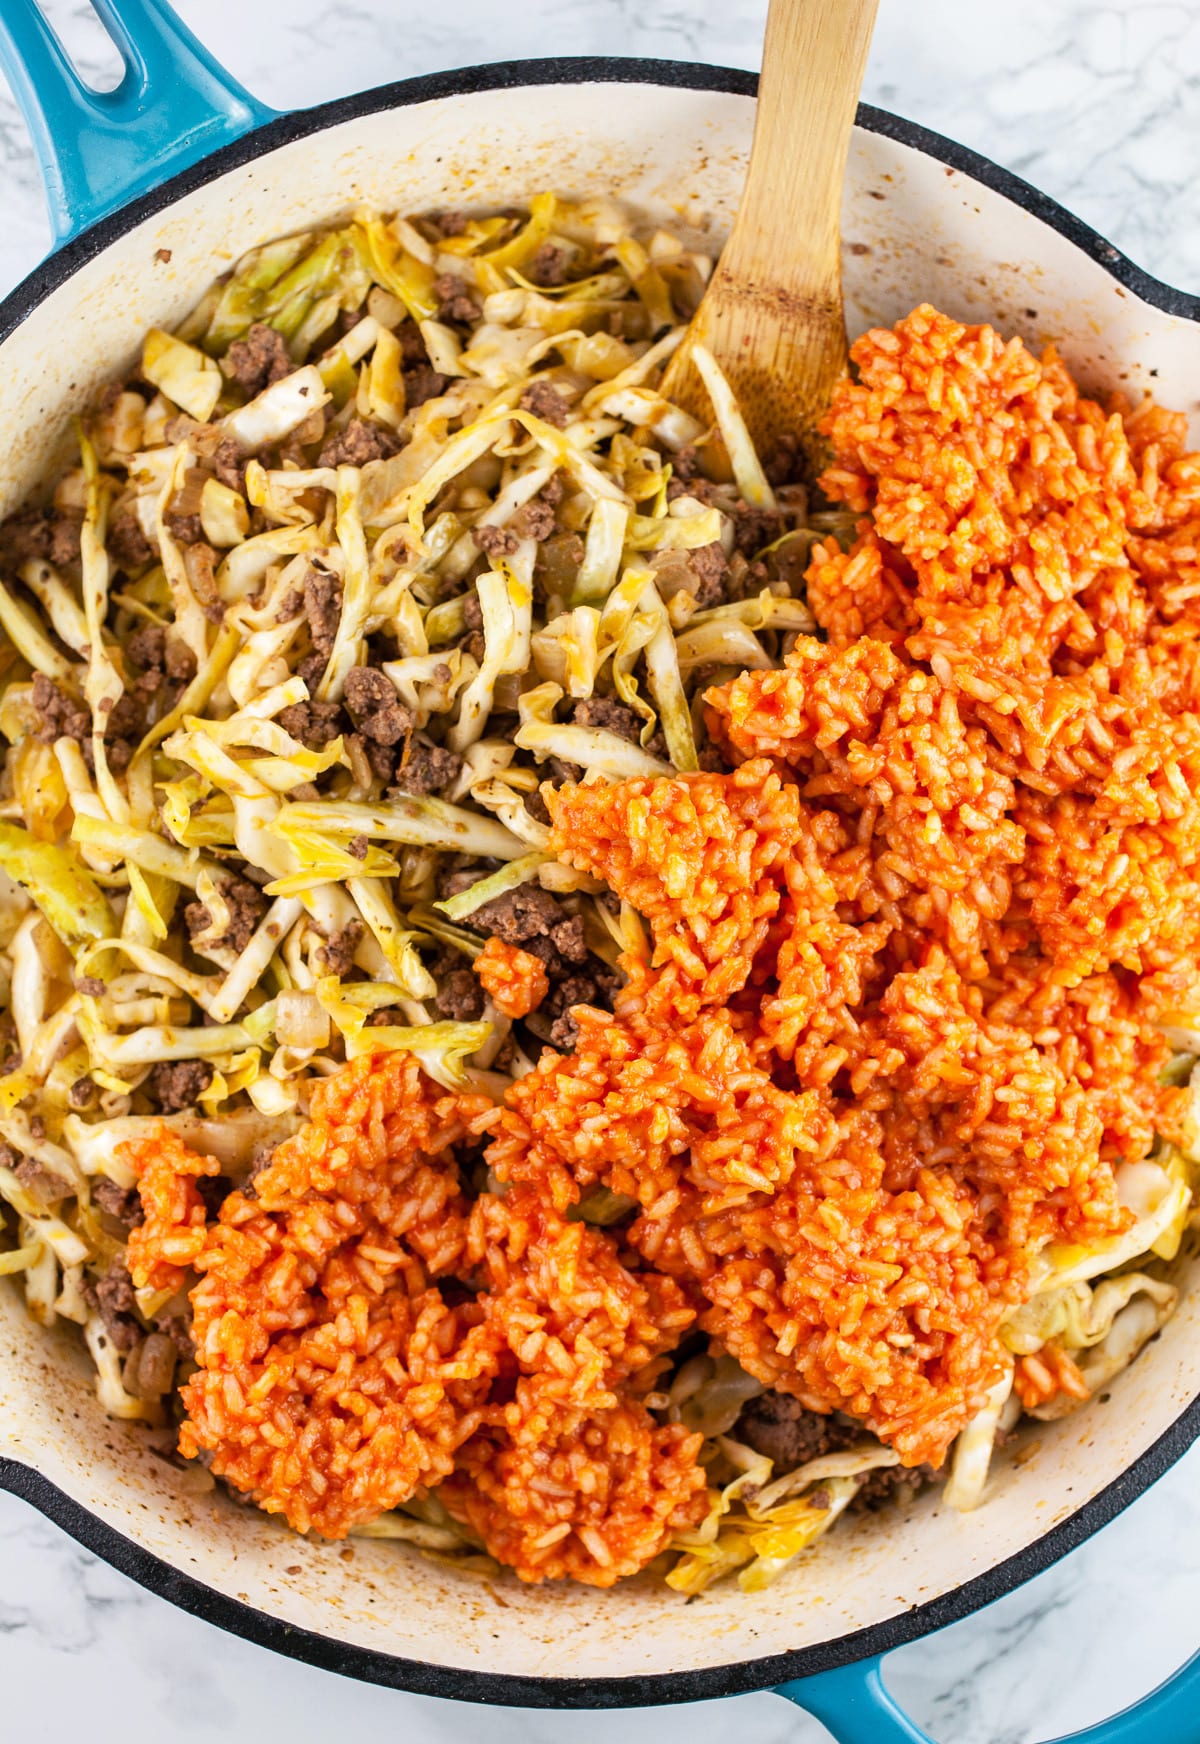 Cooked rice added to ground beef and cabbage in skillet.